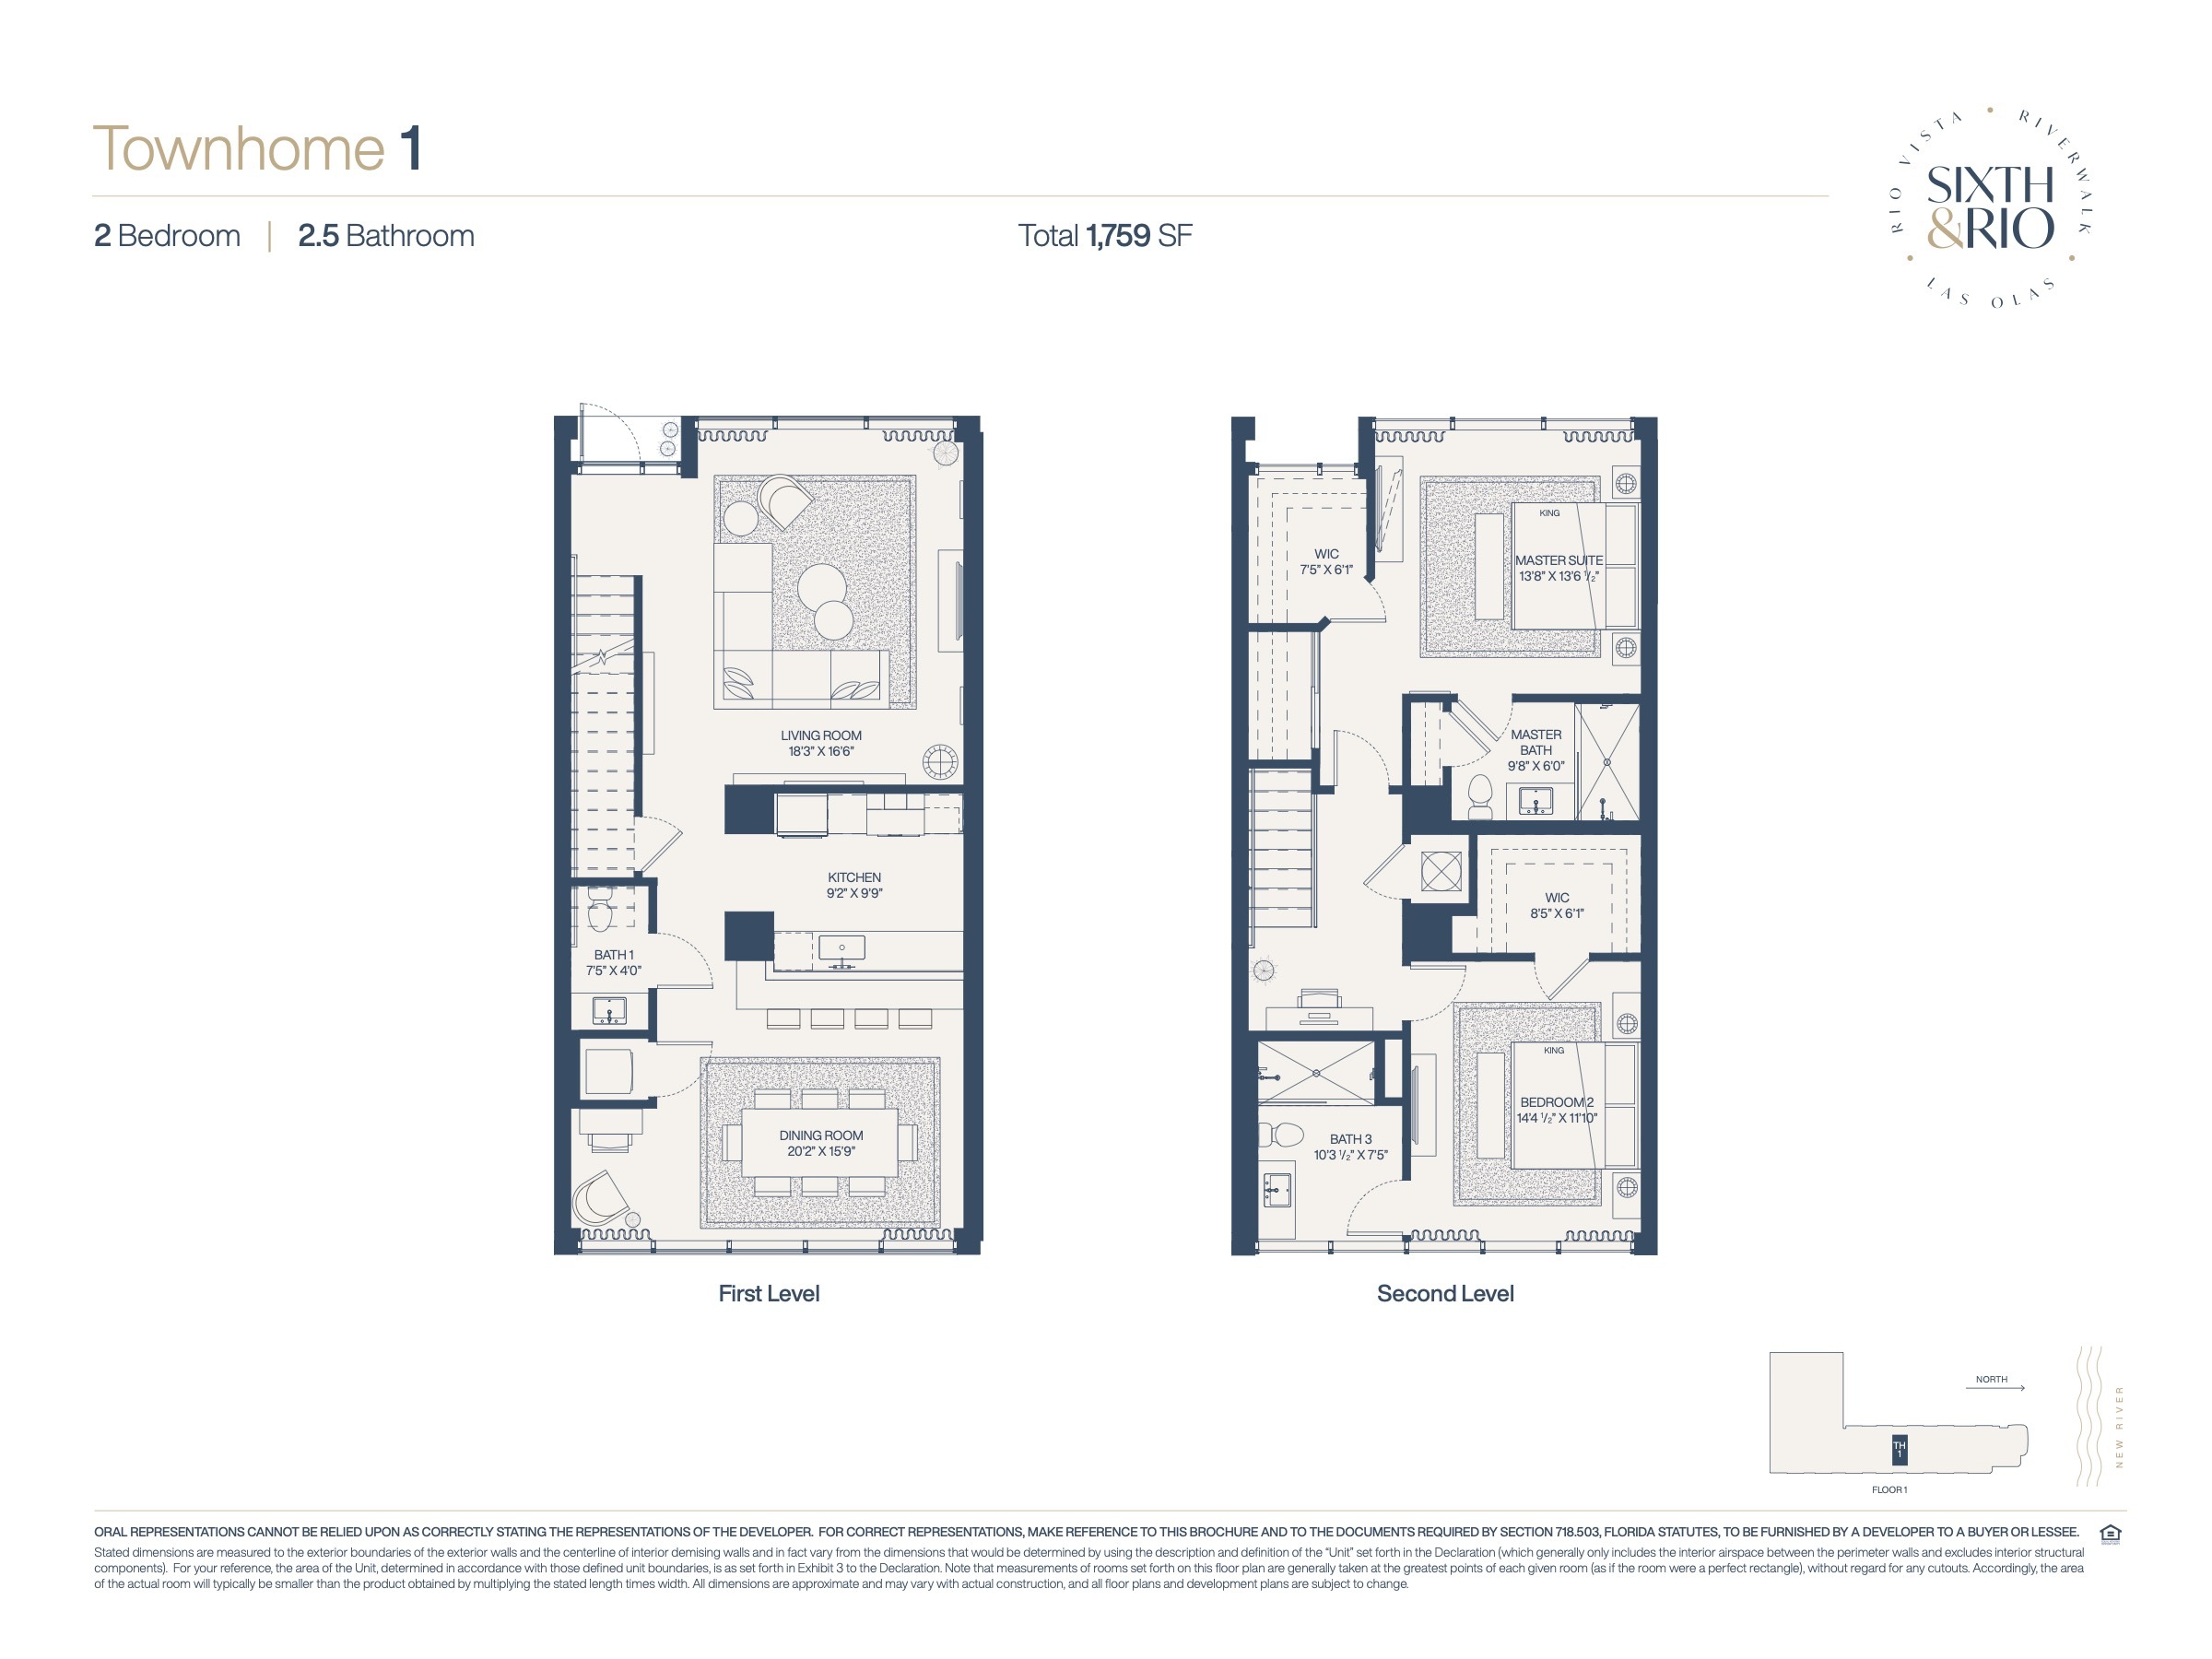 Floor Plan for Sixth & Rio Fort Lauderdale Floorplans, Townhome 1